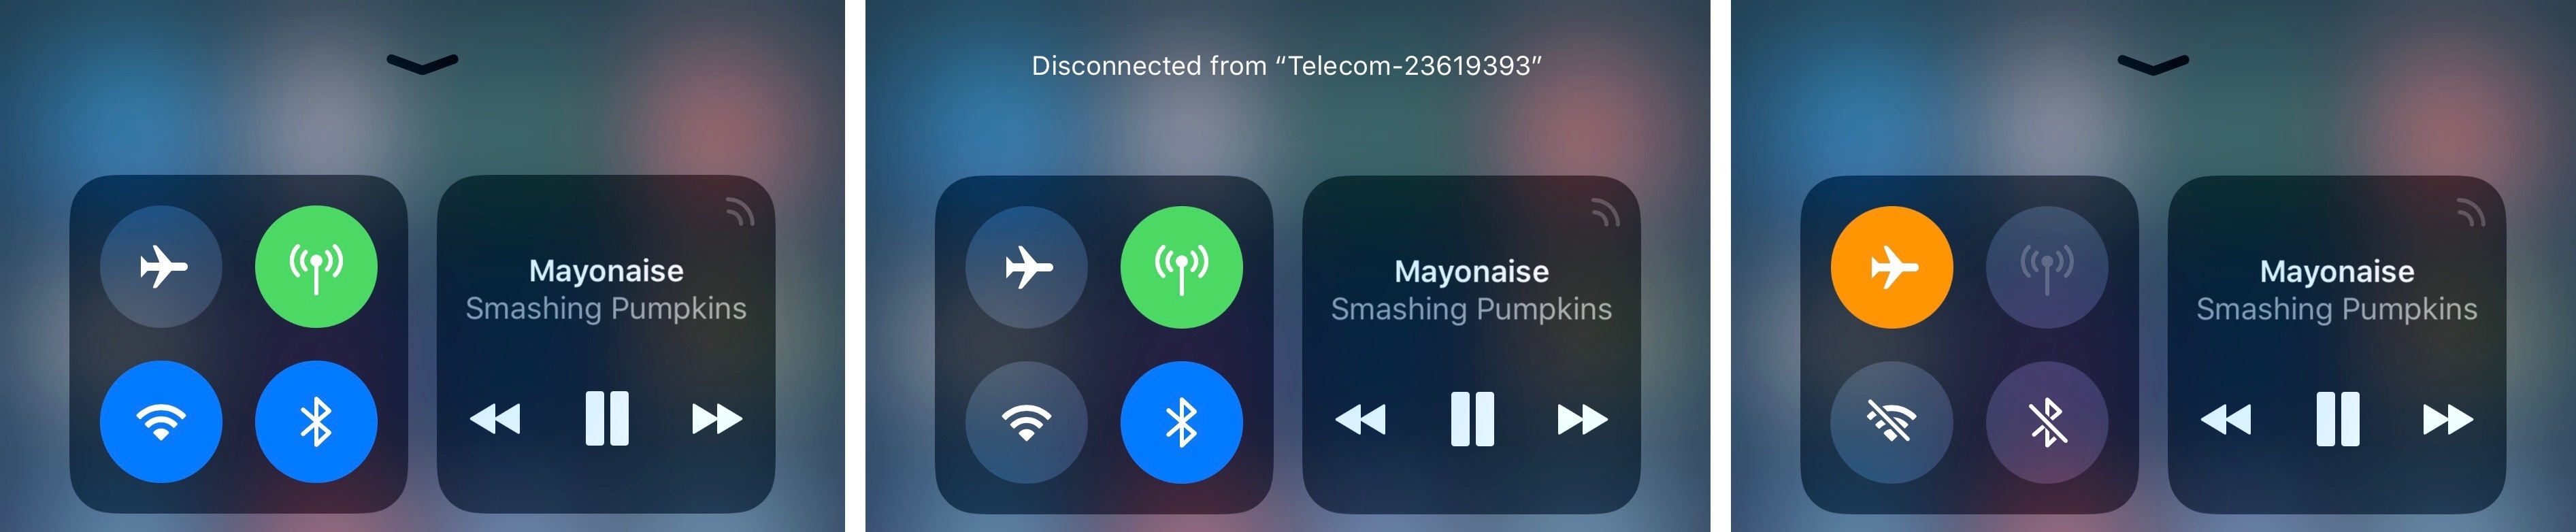 Multiple Wi-Fi states in Control Center (on, disconnected, off).